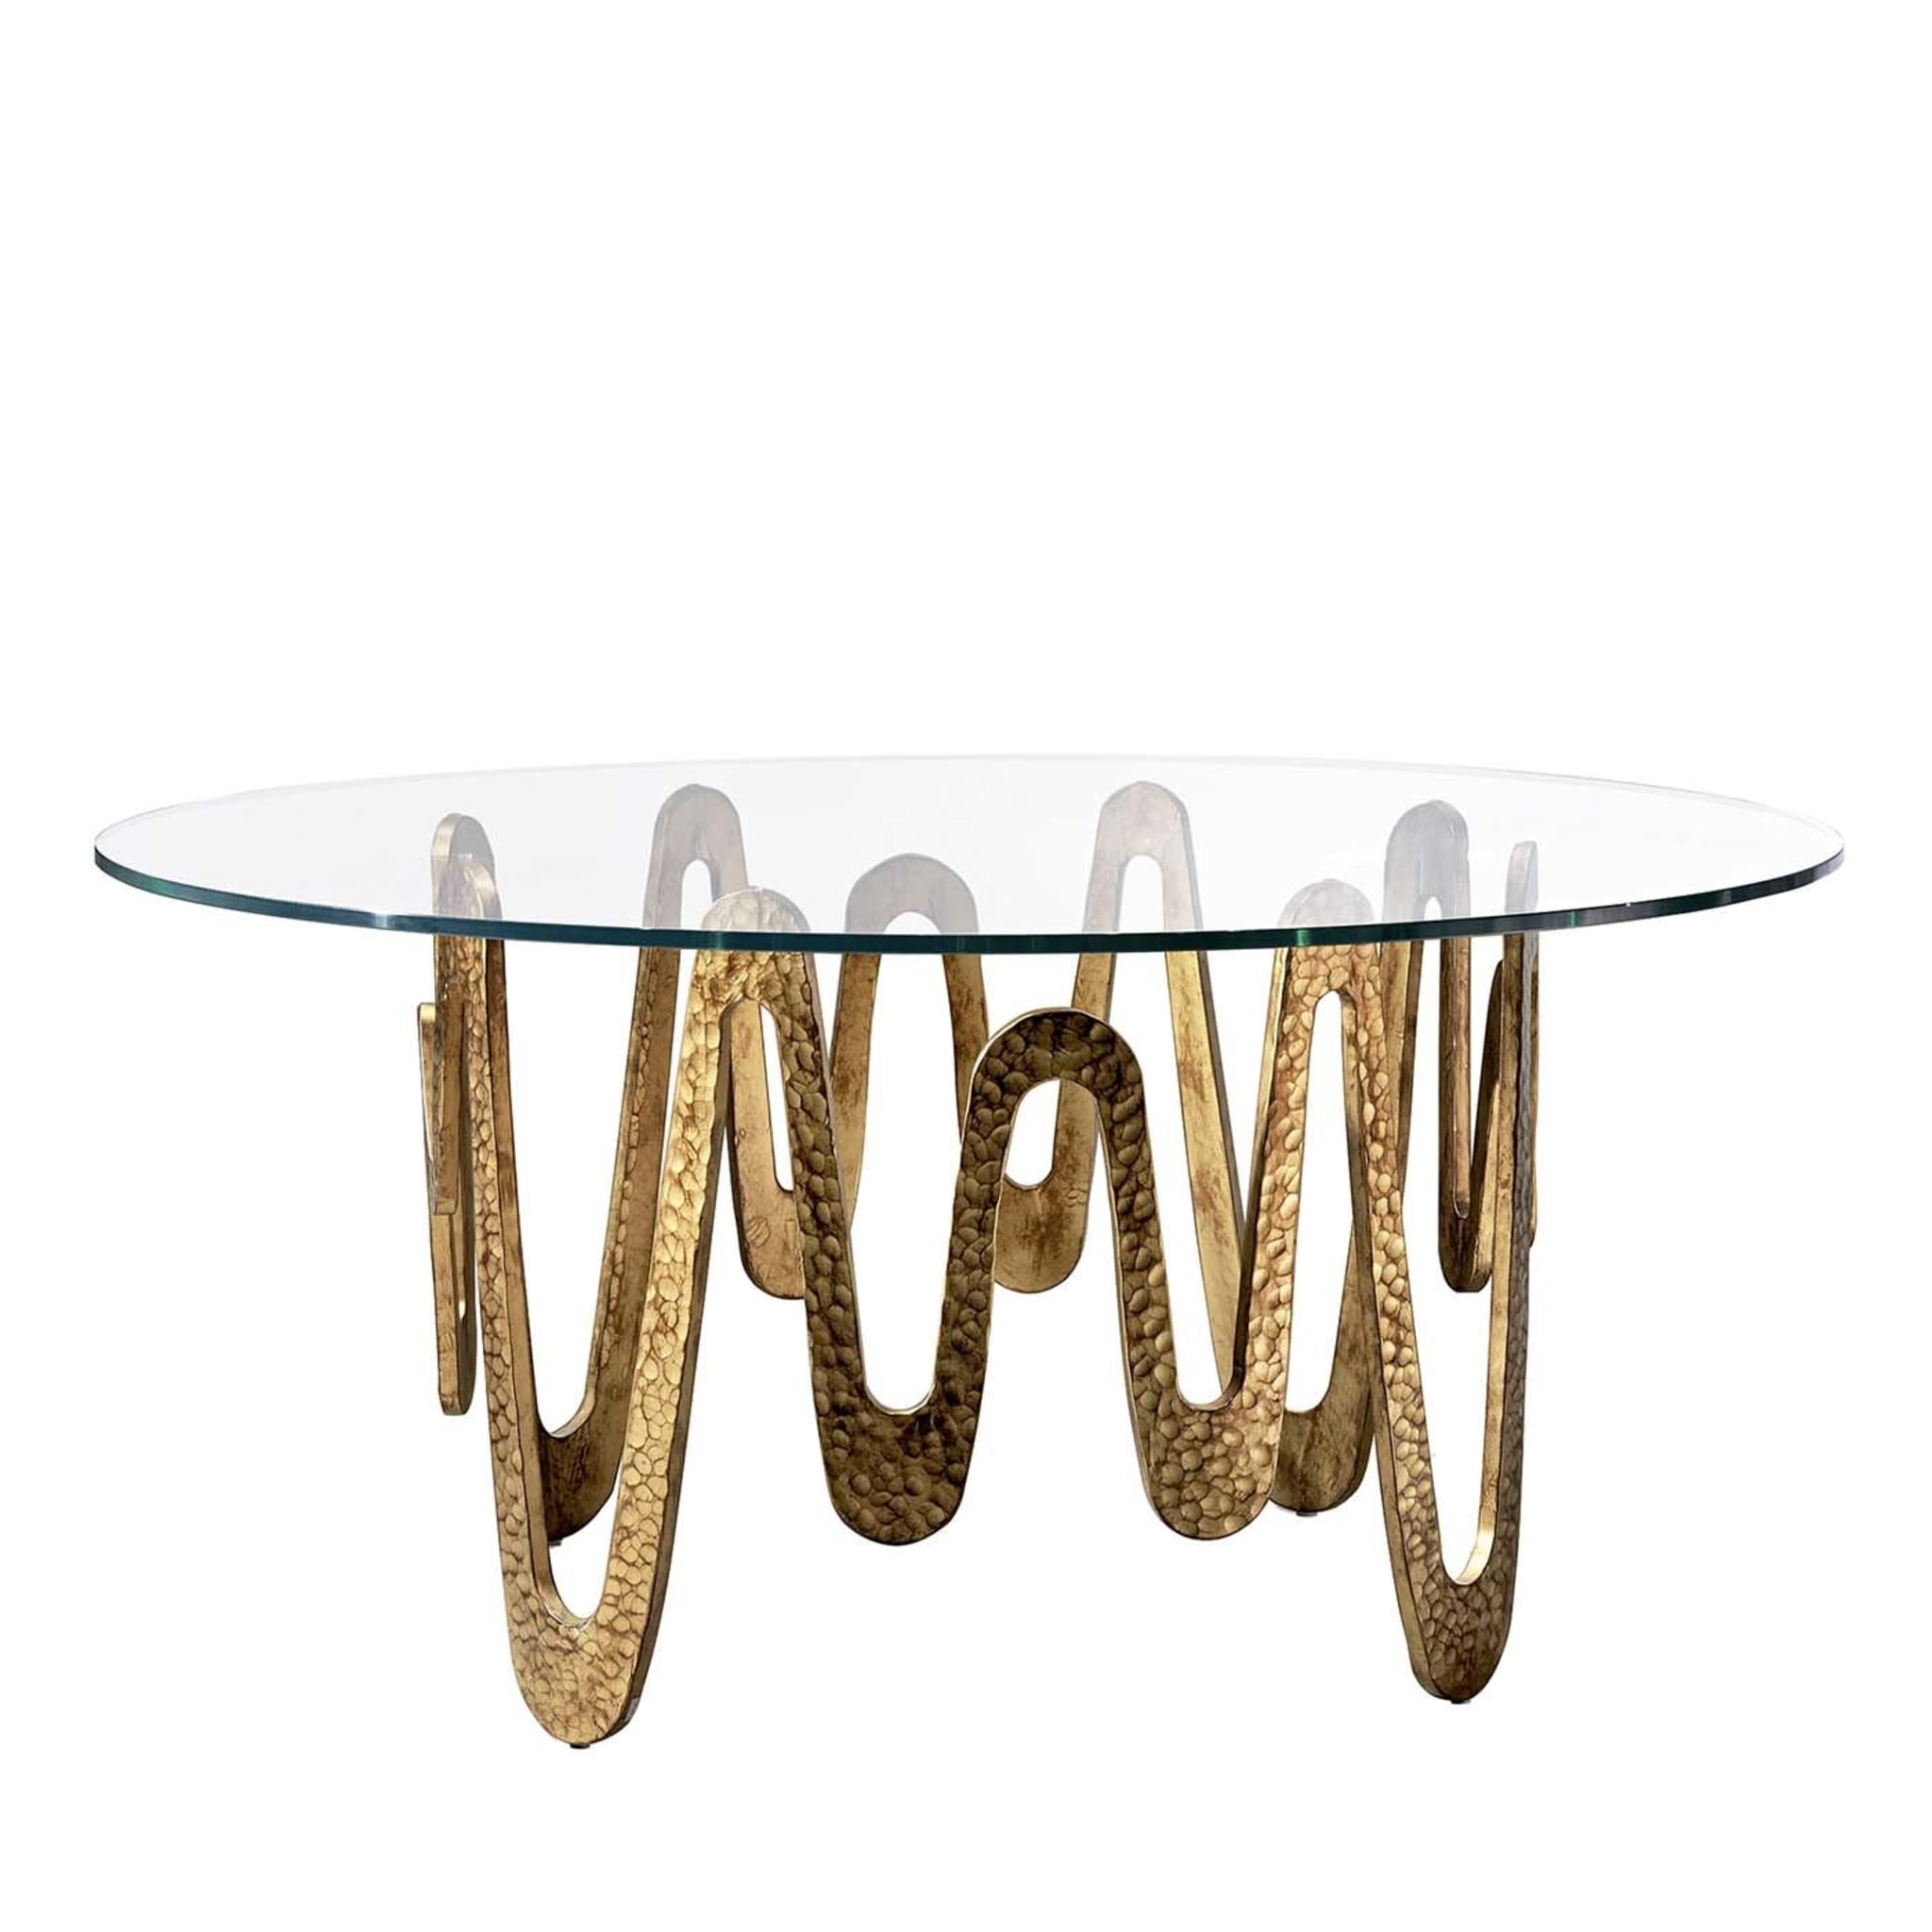 Onde Gold Table - Main view